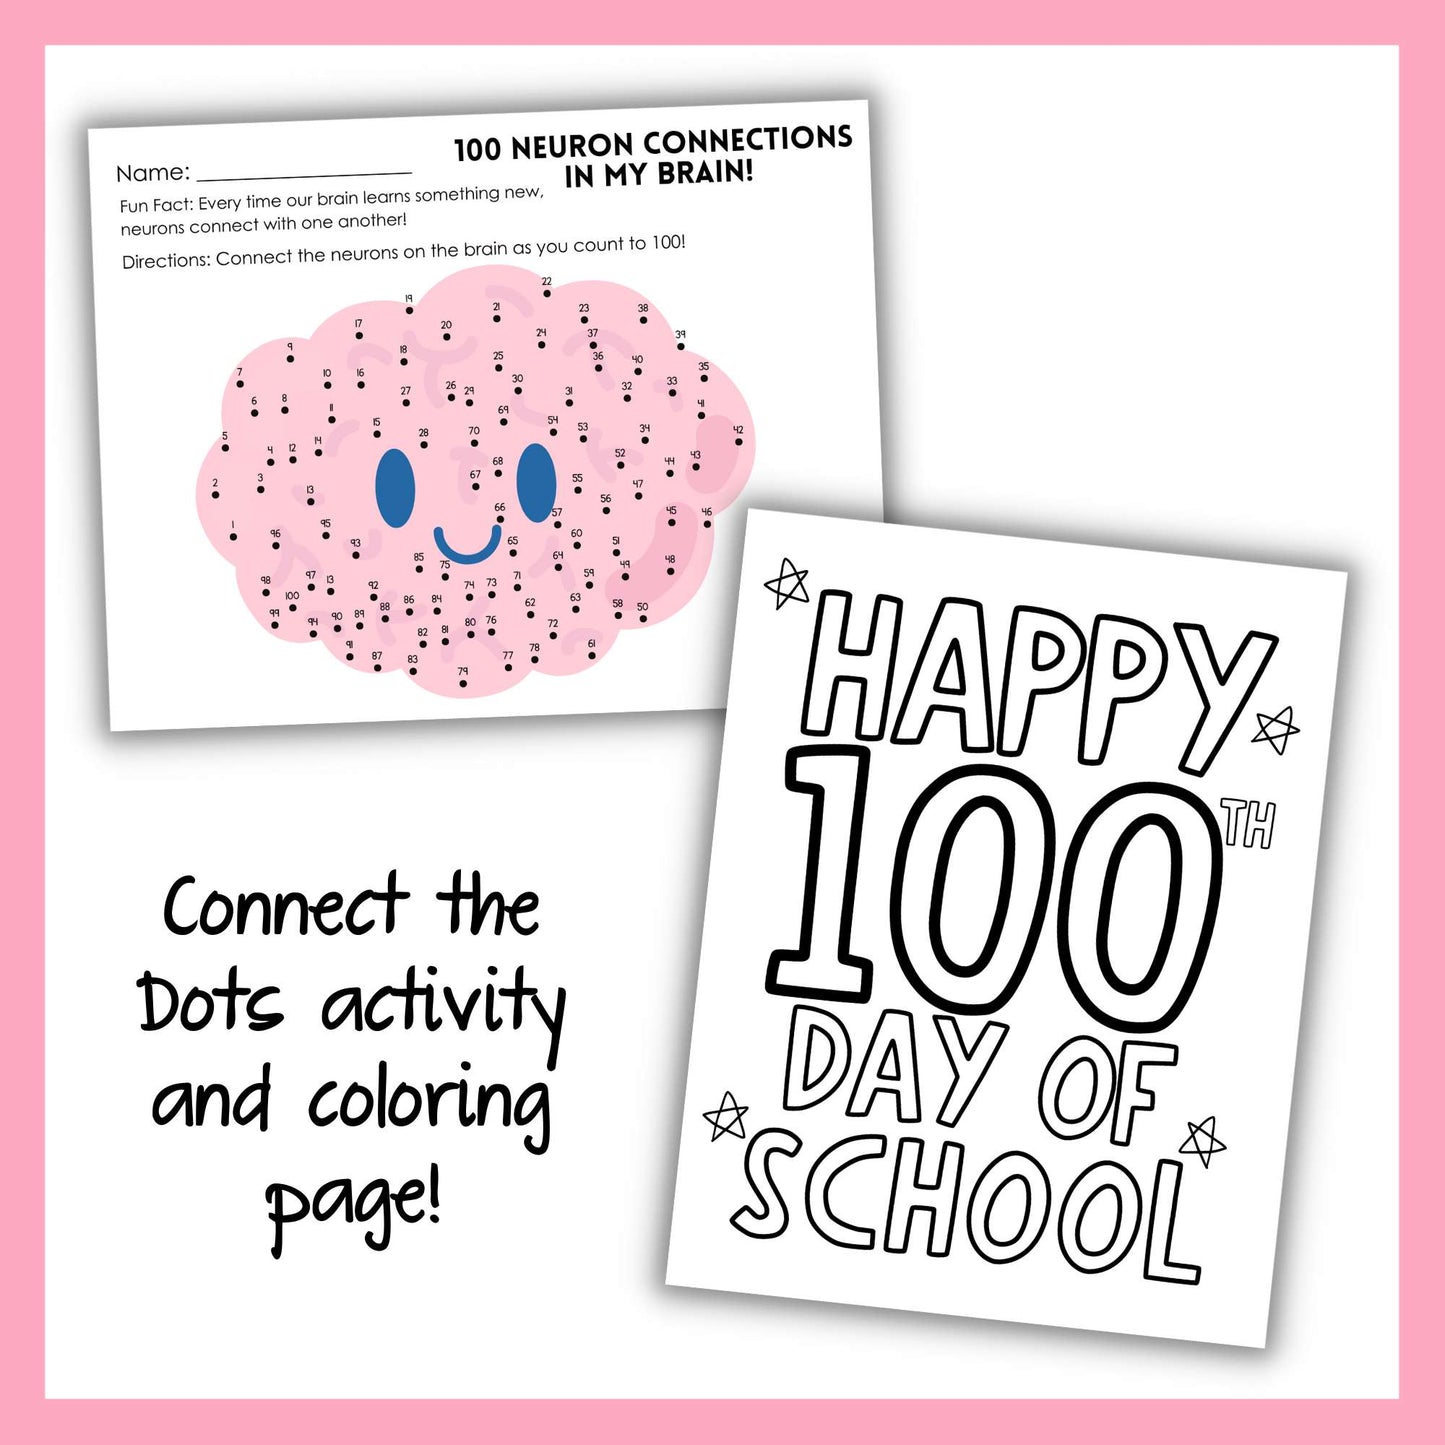 100th Day of School Crown | Growth Mindset Activities and Puzzles